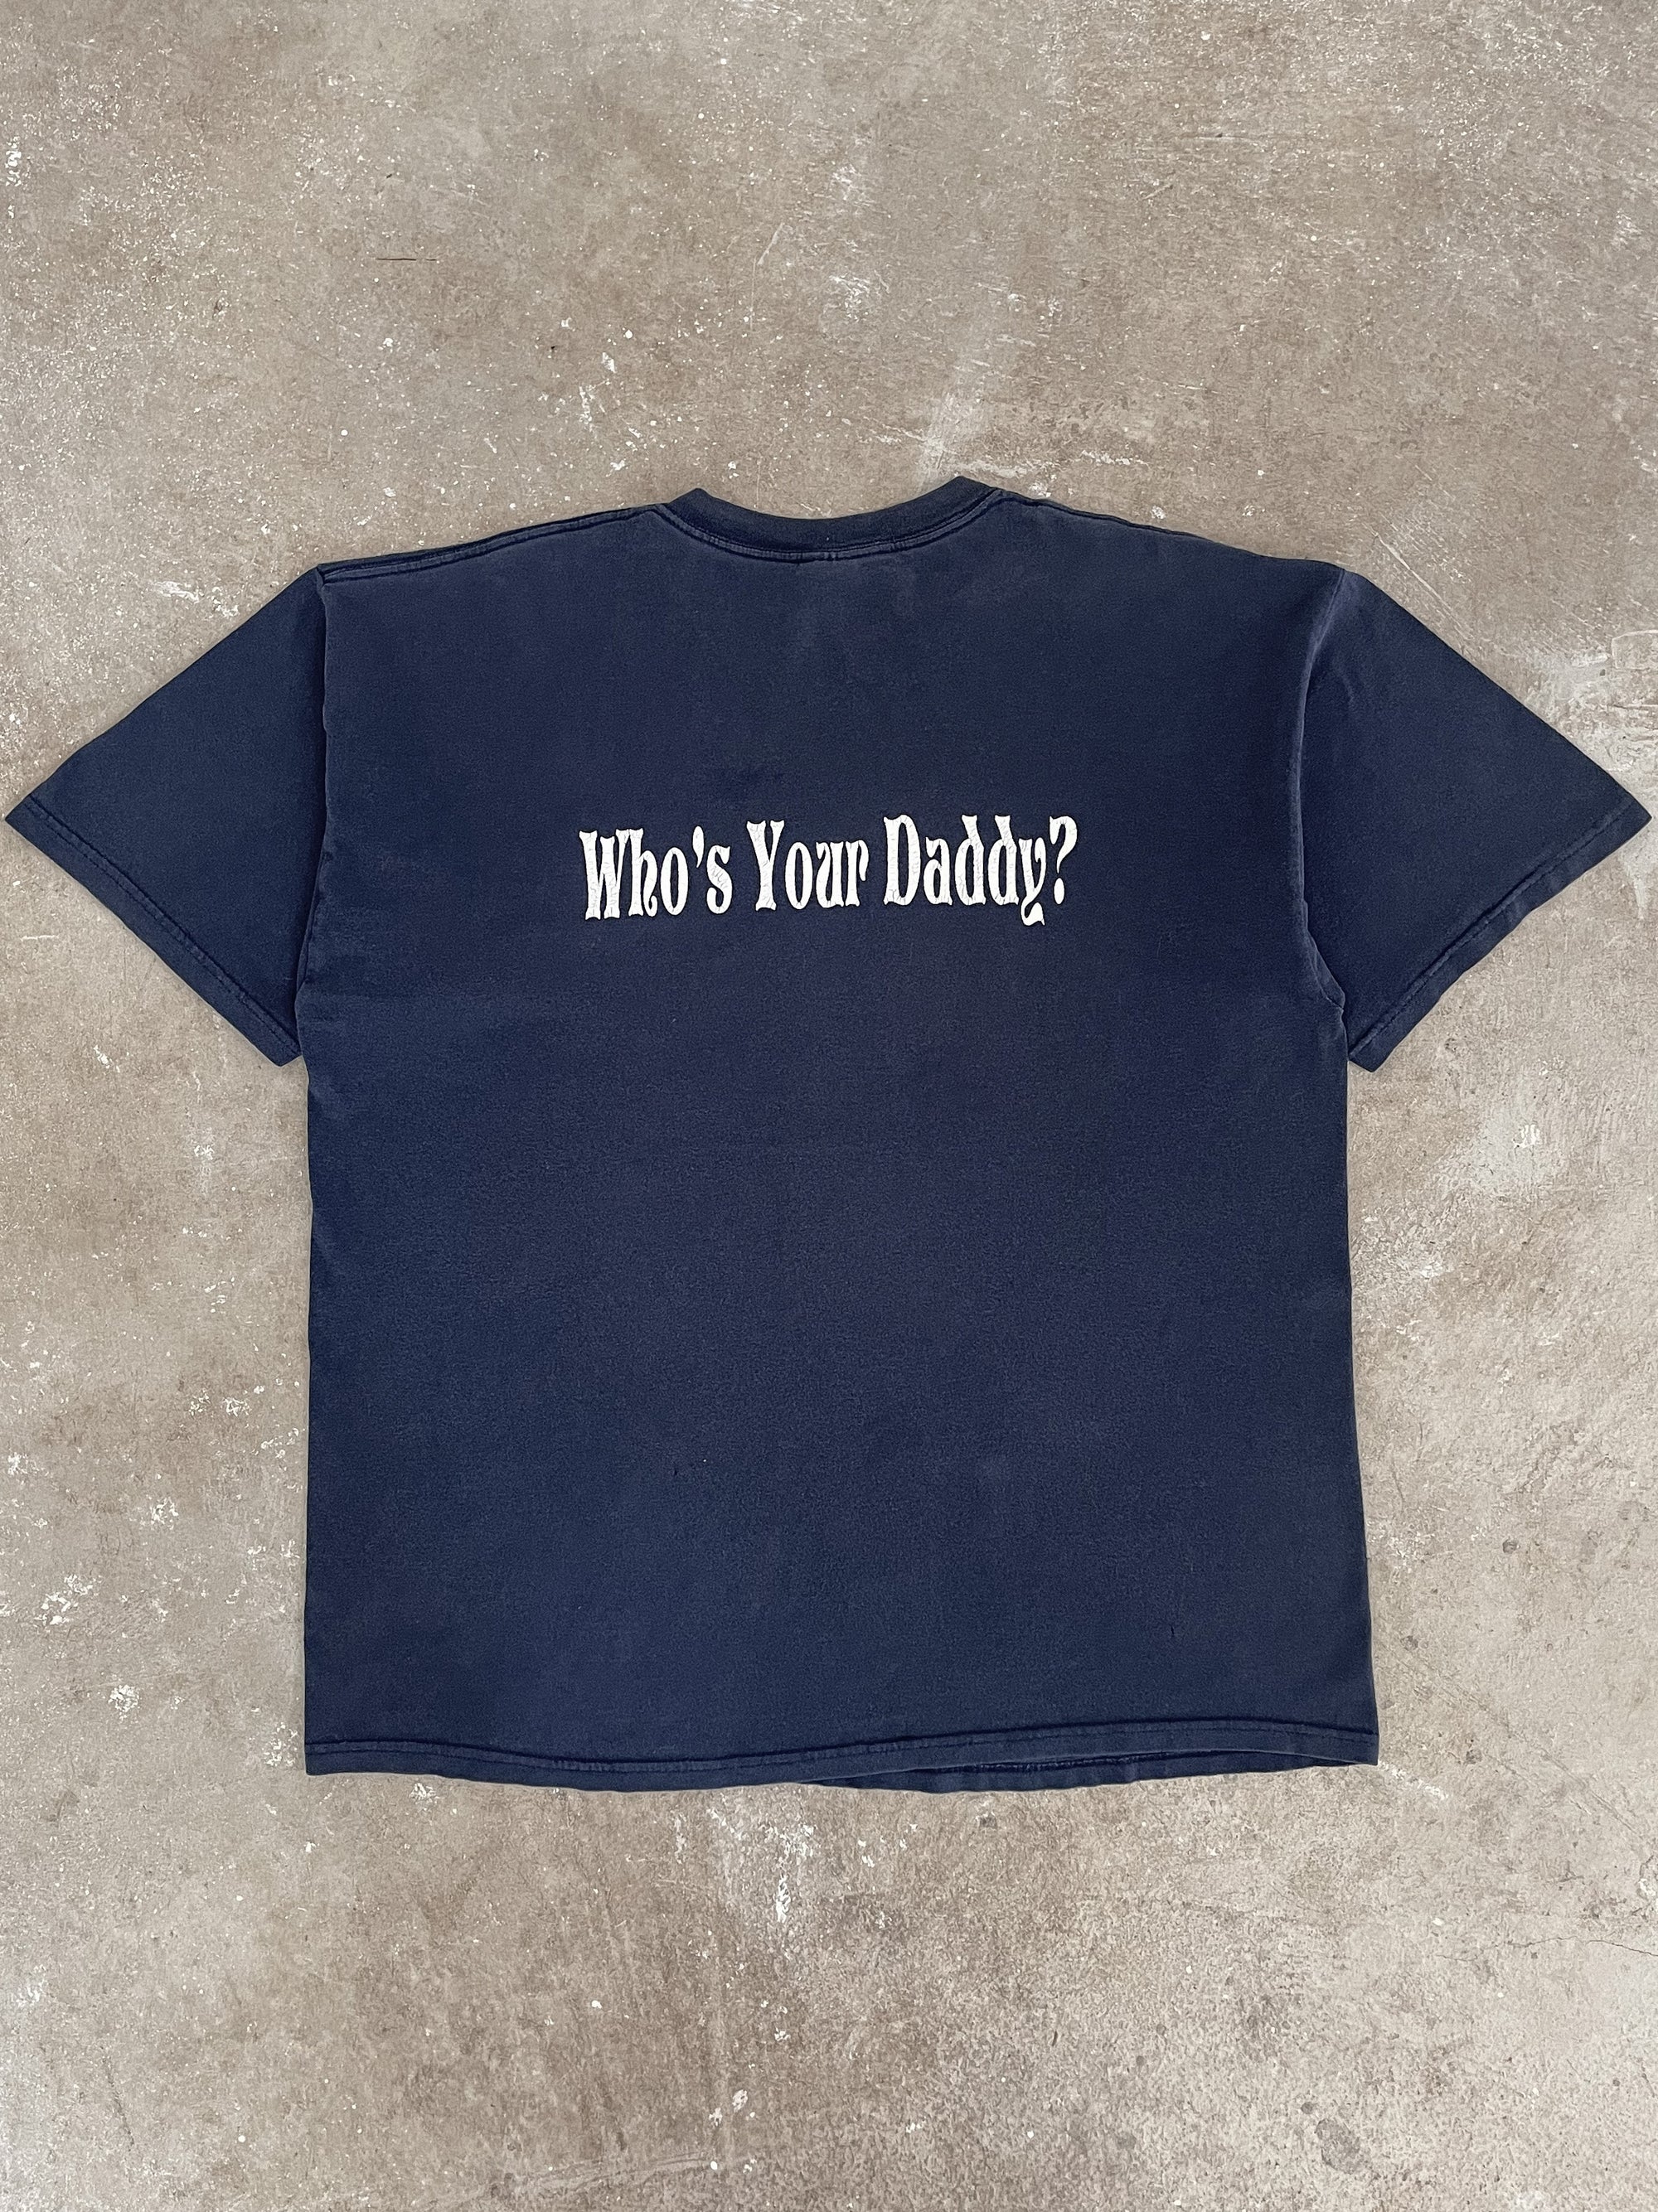 2000s “Who’s Your Daddy?” Tee (XL)